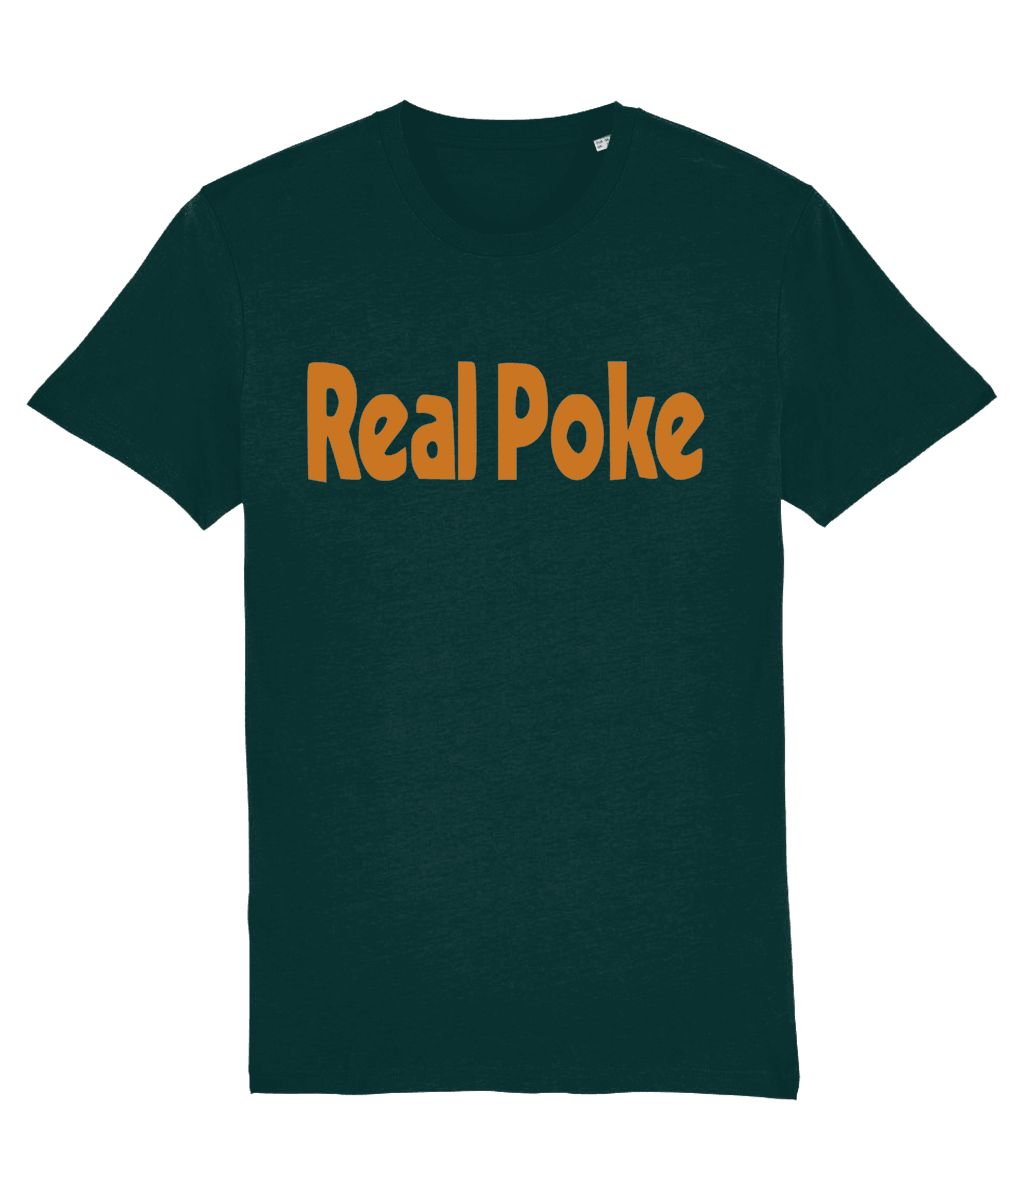 REAL POKE: T-Shirt Inspired by Lambretta GP Adverts (4 Colour Options) Small to 4XL - SOUND IS COLOUR